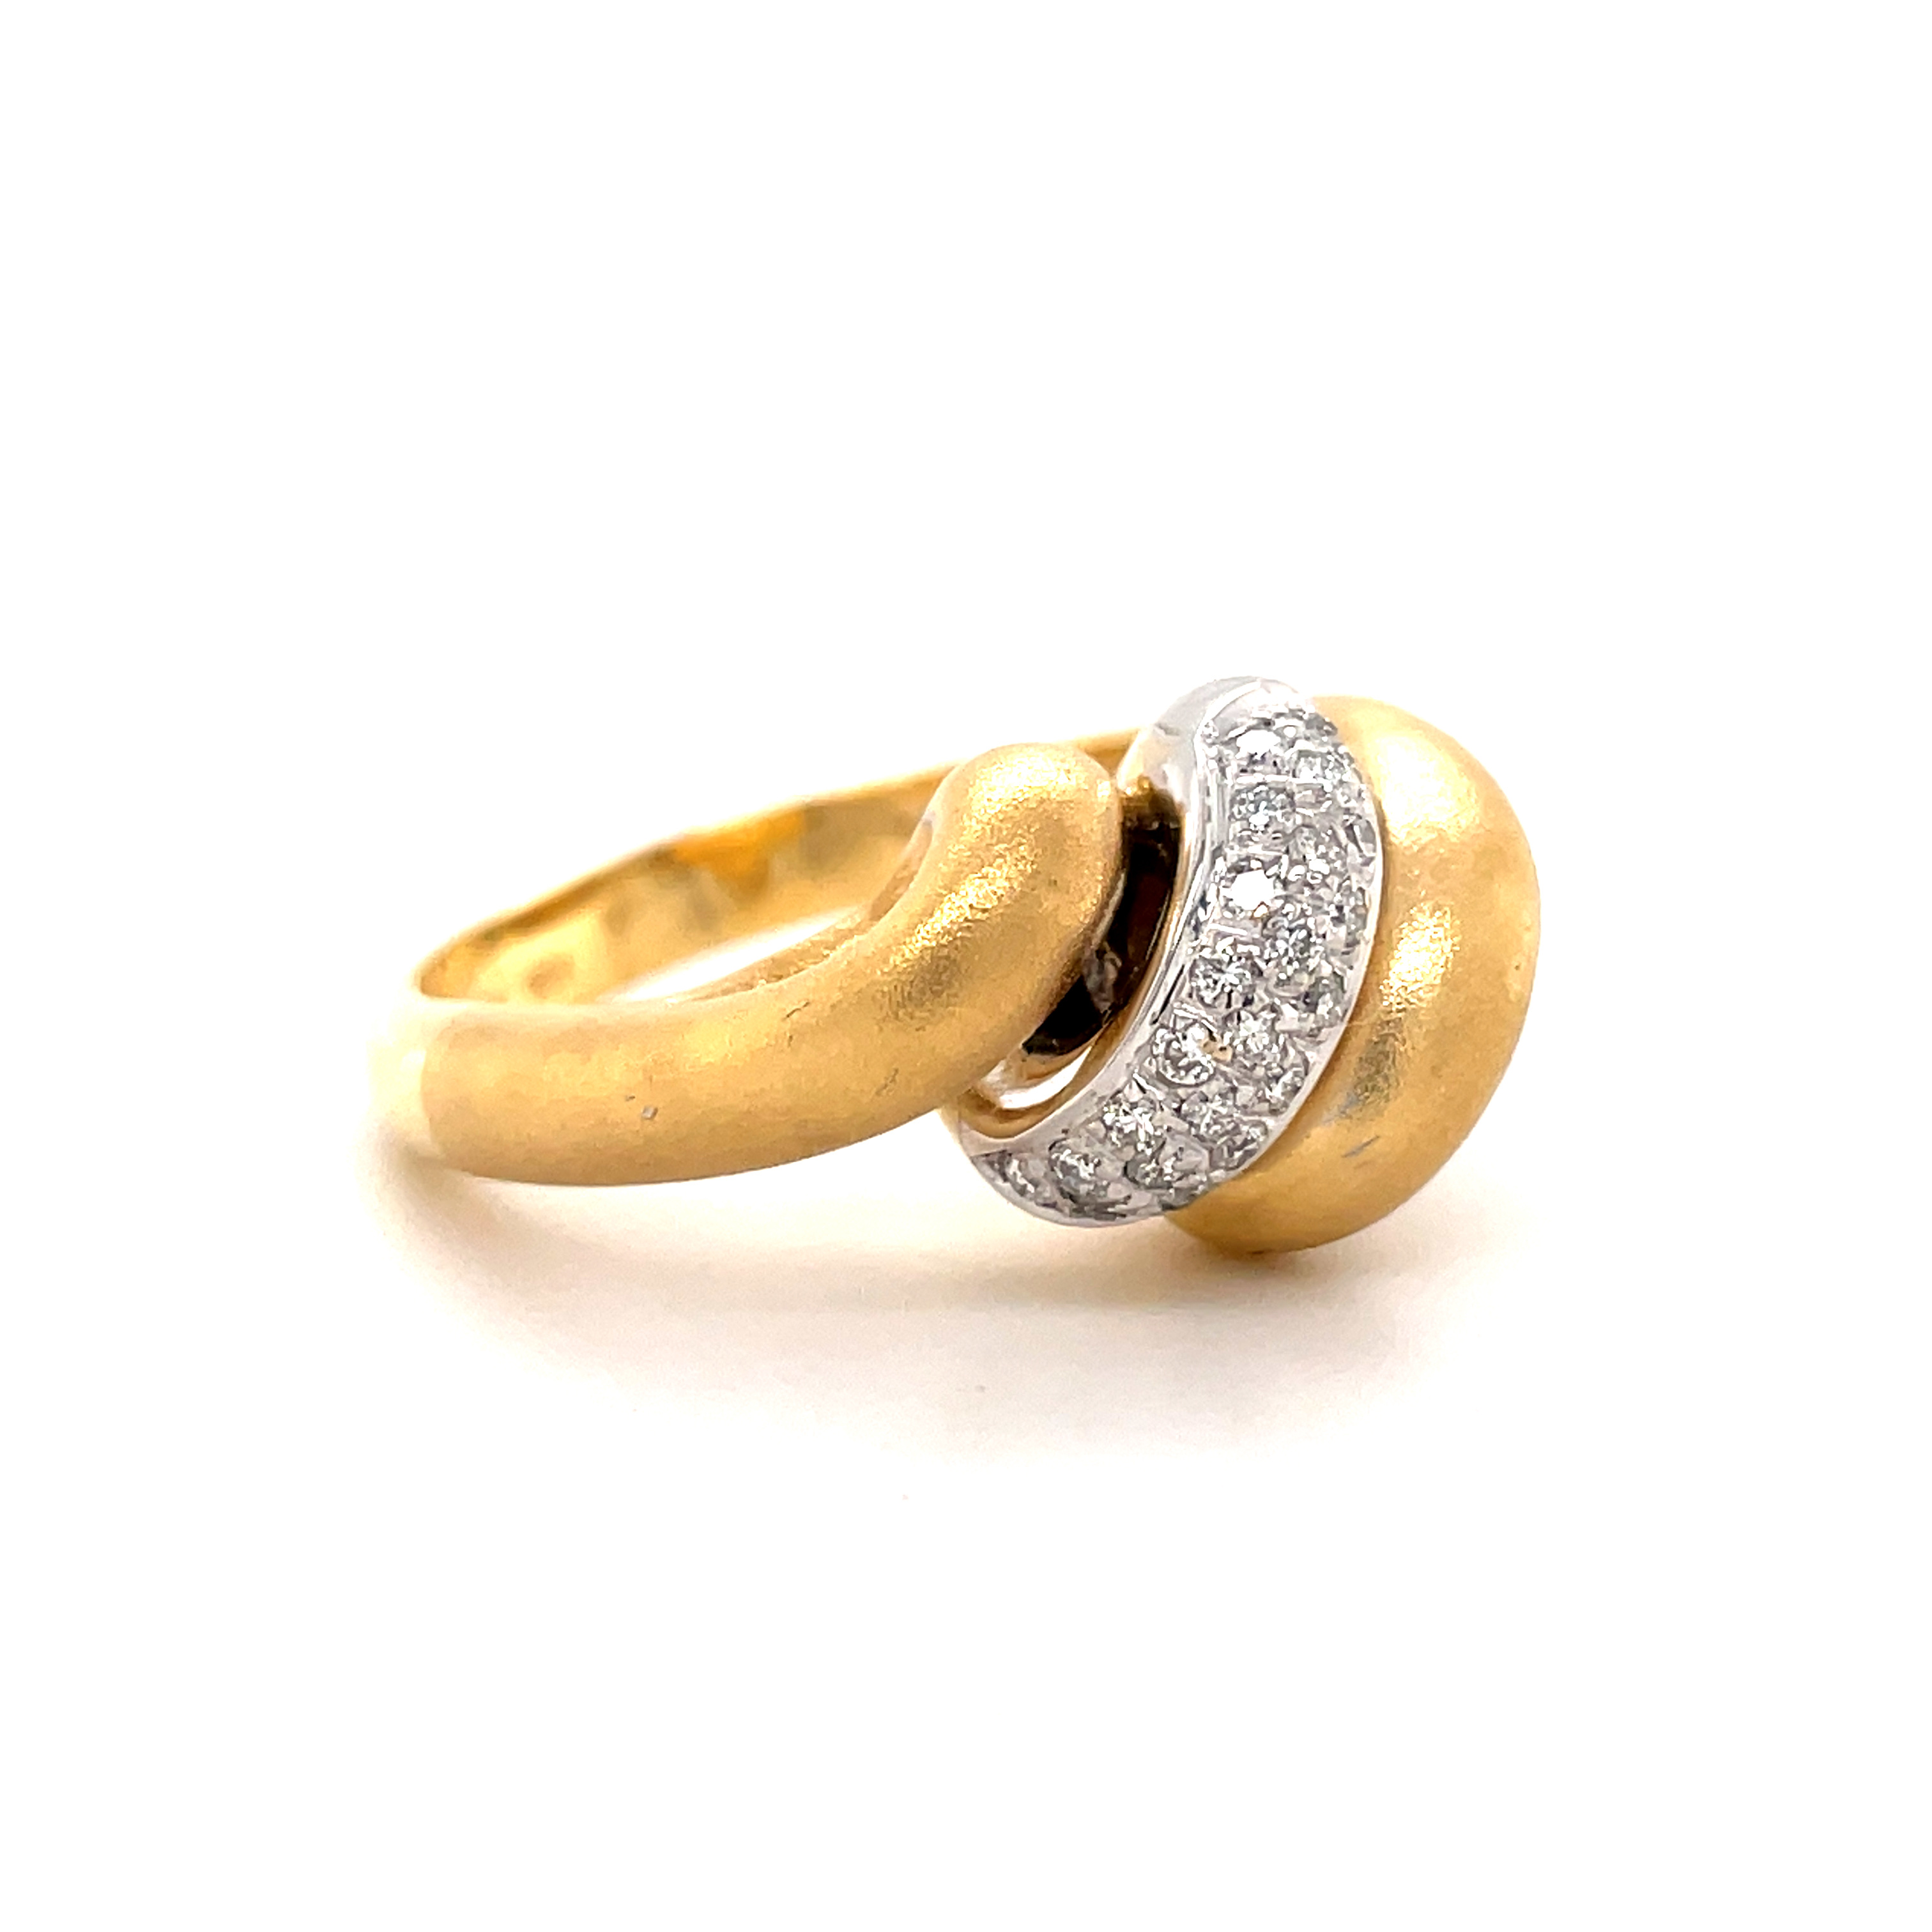 A unique combination of timeless beauty and modern style, this Italian 18k gold Triple Coil Diamond Ring is sure to stand out. Crafted with 4.15 mm width and 0.20 cts of round diamonds, this piece is sure to dazzle. With a matte finish and 11.50 mm width, it's an eye-catching accessory perfect for any occasion. Size 7.5 (can be resized).